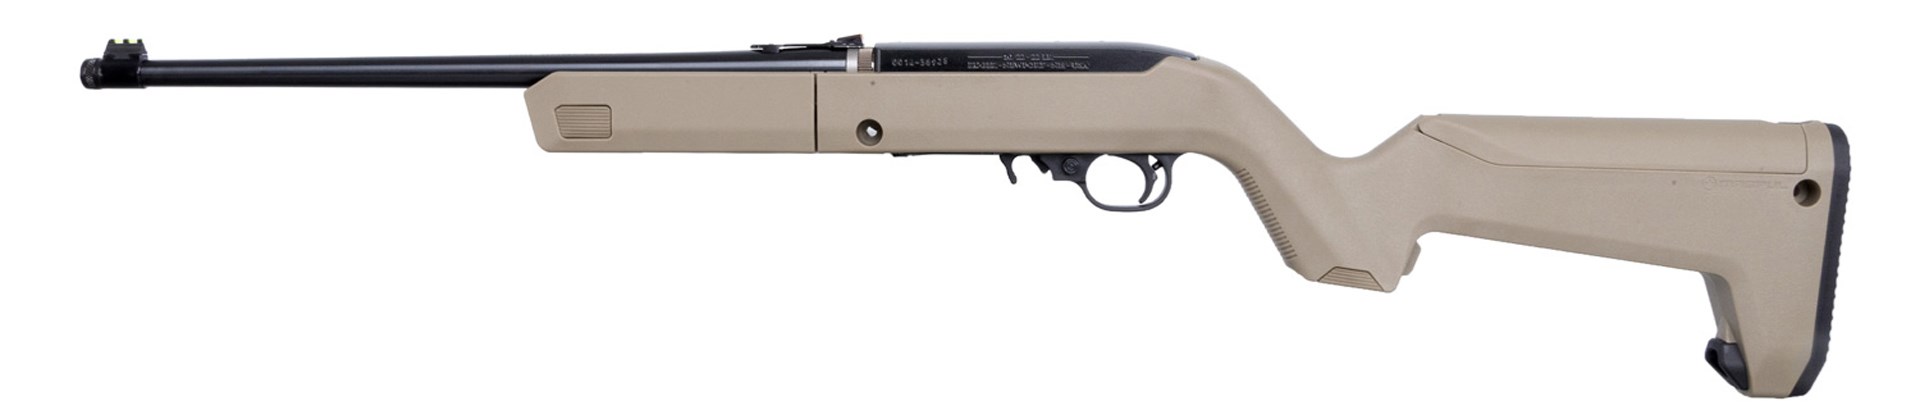 Ruger 10/22 Takdown .22 LR rifle Davidson's Exclusive Magpul X-22 Backpacker stock FDE color on white background